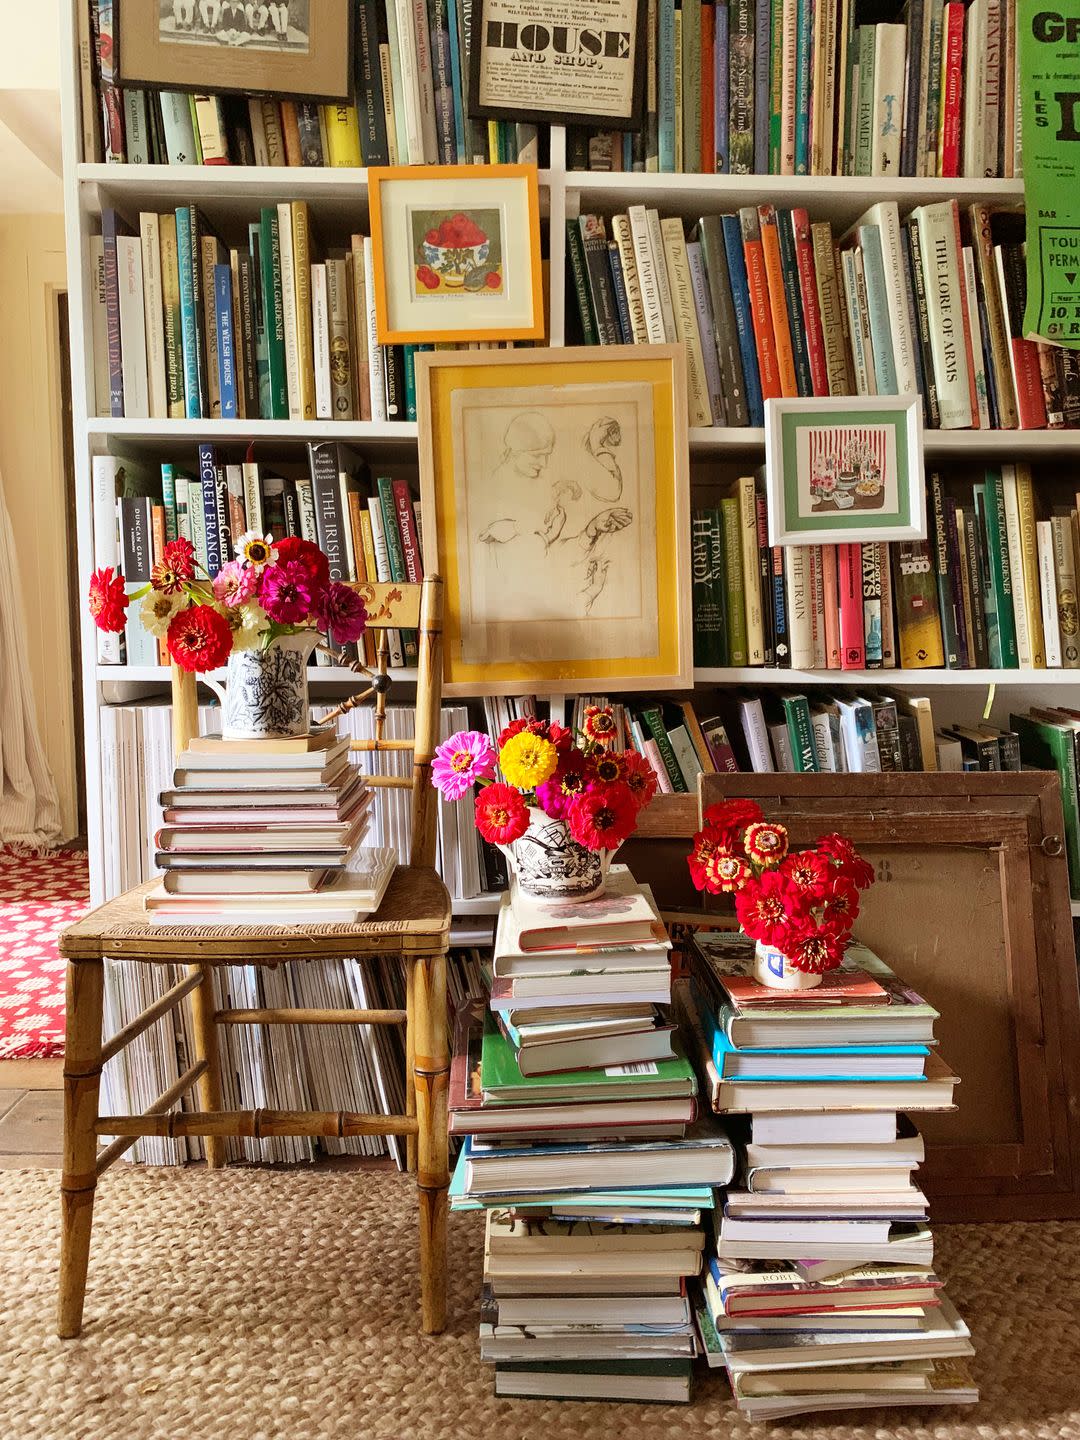 piles of books on the floor and on a chair next to a packed bookshelf